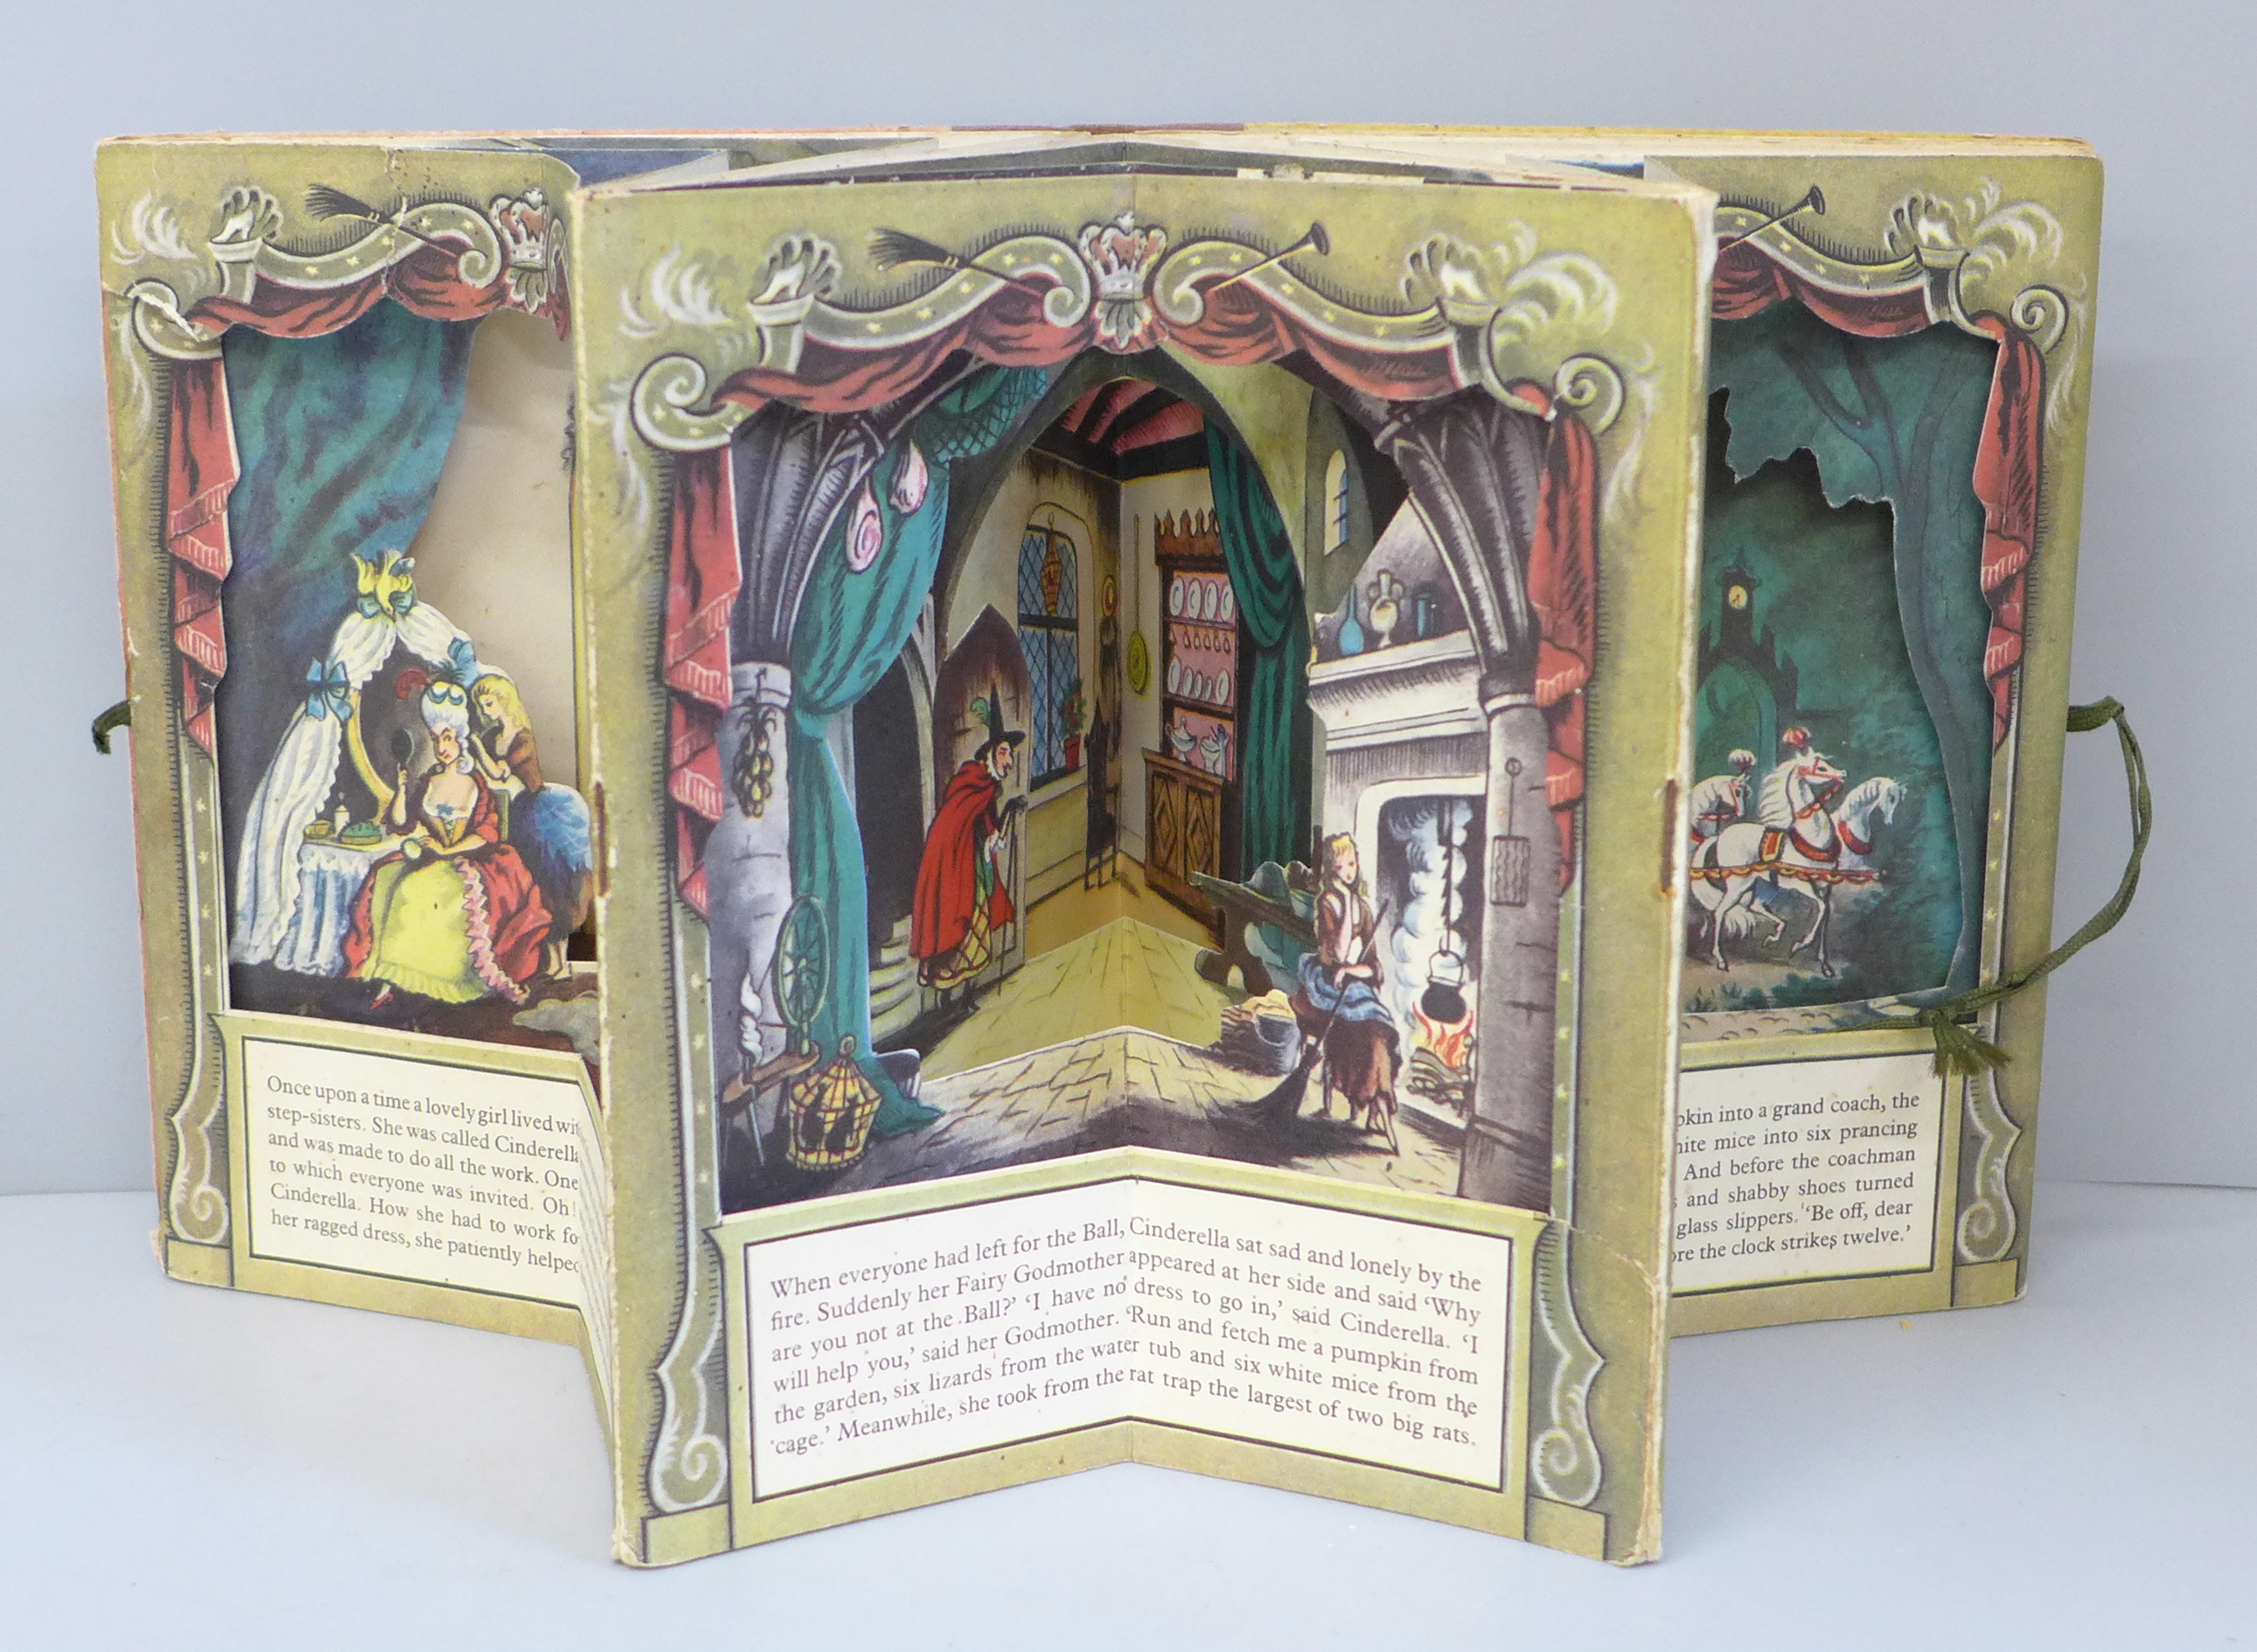 One volume, Cinderella, a Peepshow book, illustrated by Roland Pym - Image 3 of 8